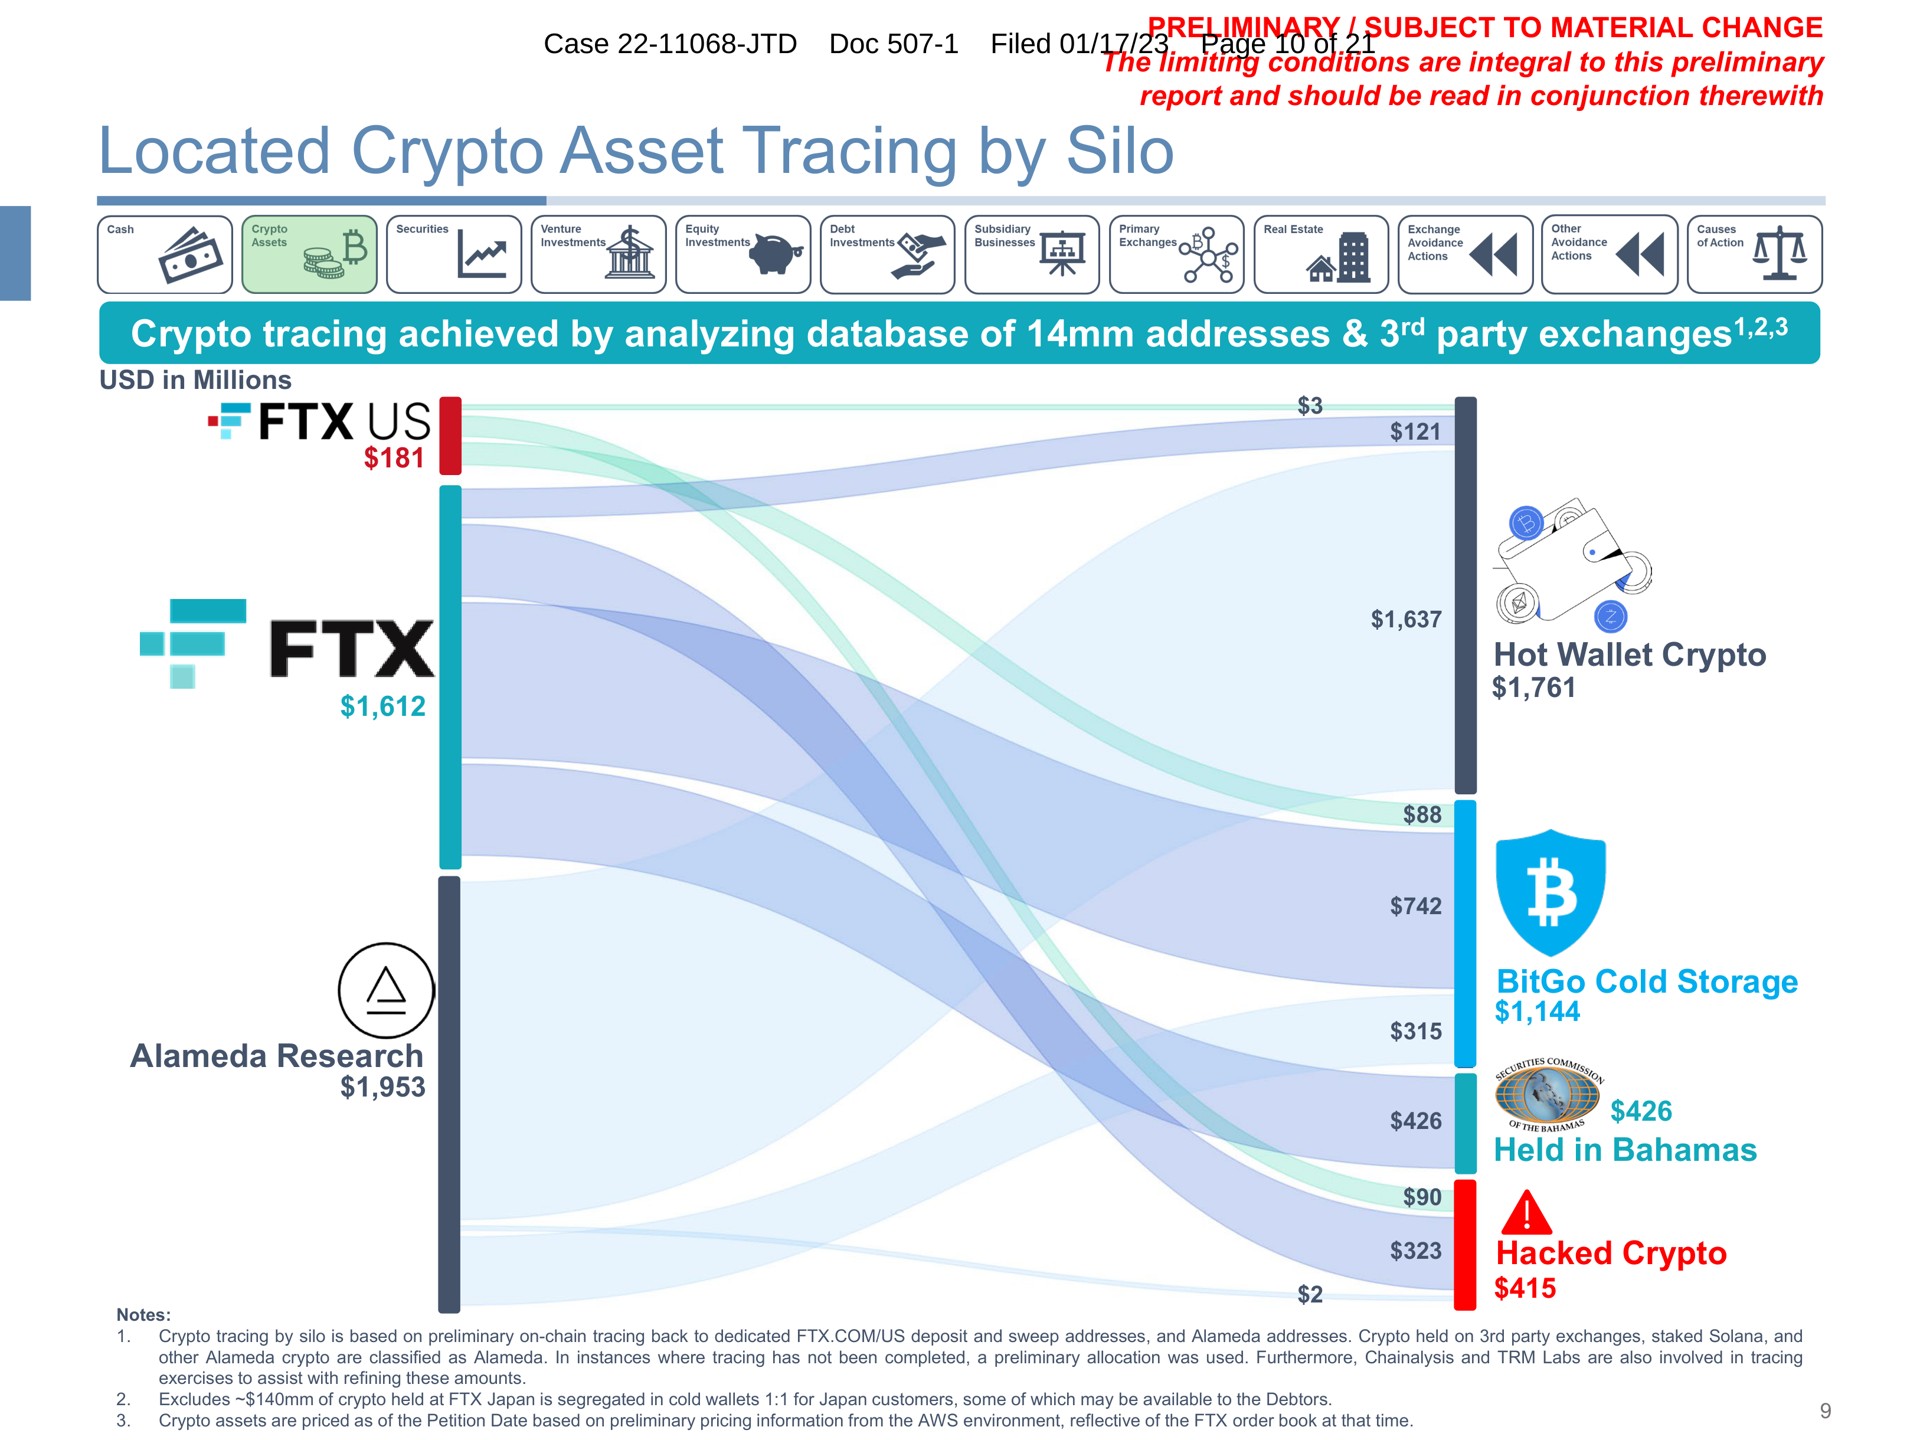 located asset tracing by silo tracing achieved by analyzing of addresses party exchanges alameda research hot wallet cold storage held in hacked case doc filed ade exchanges | FTX Trading